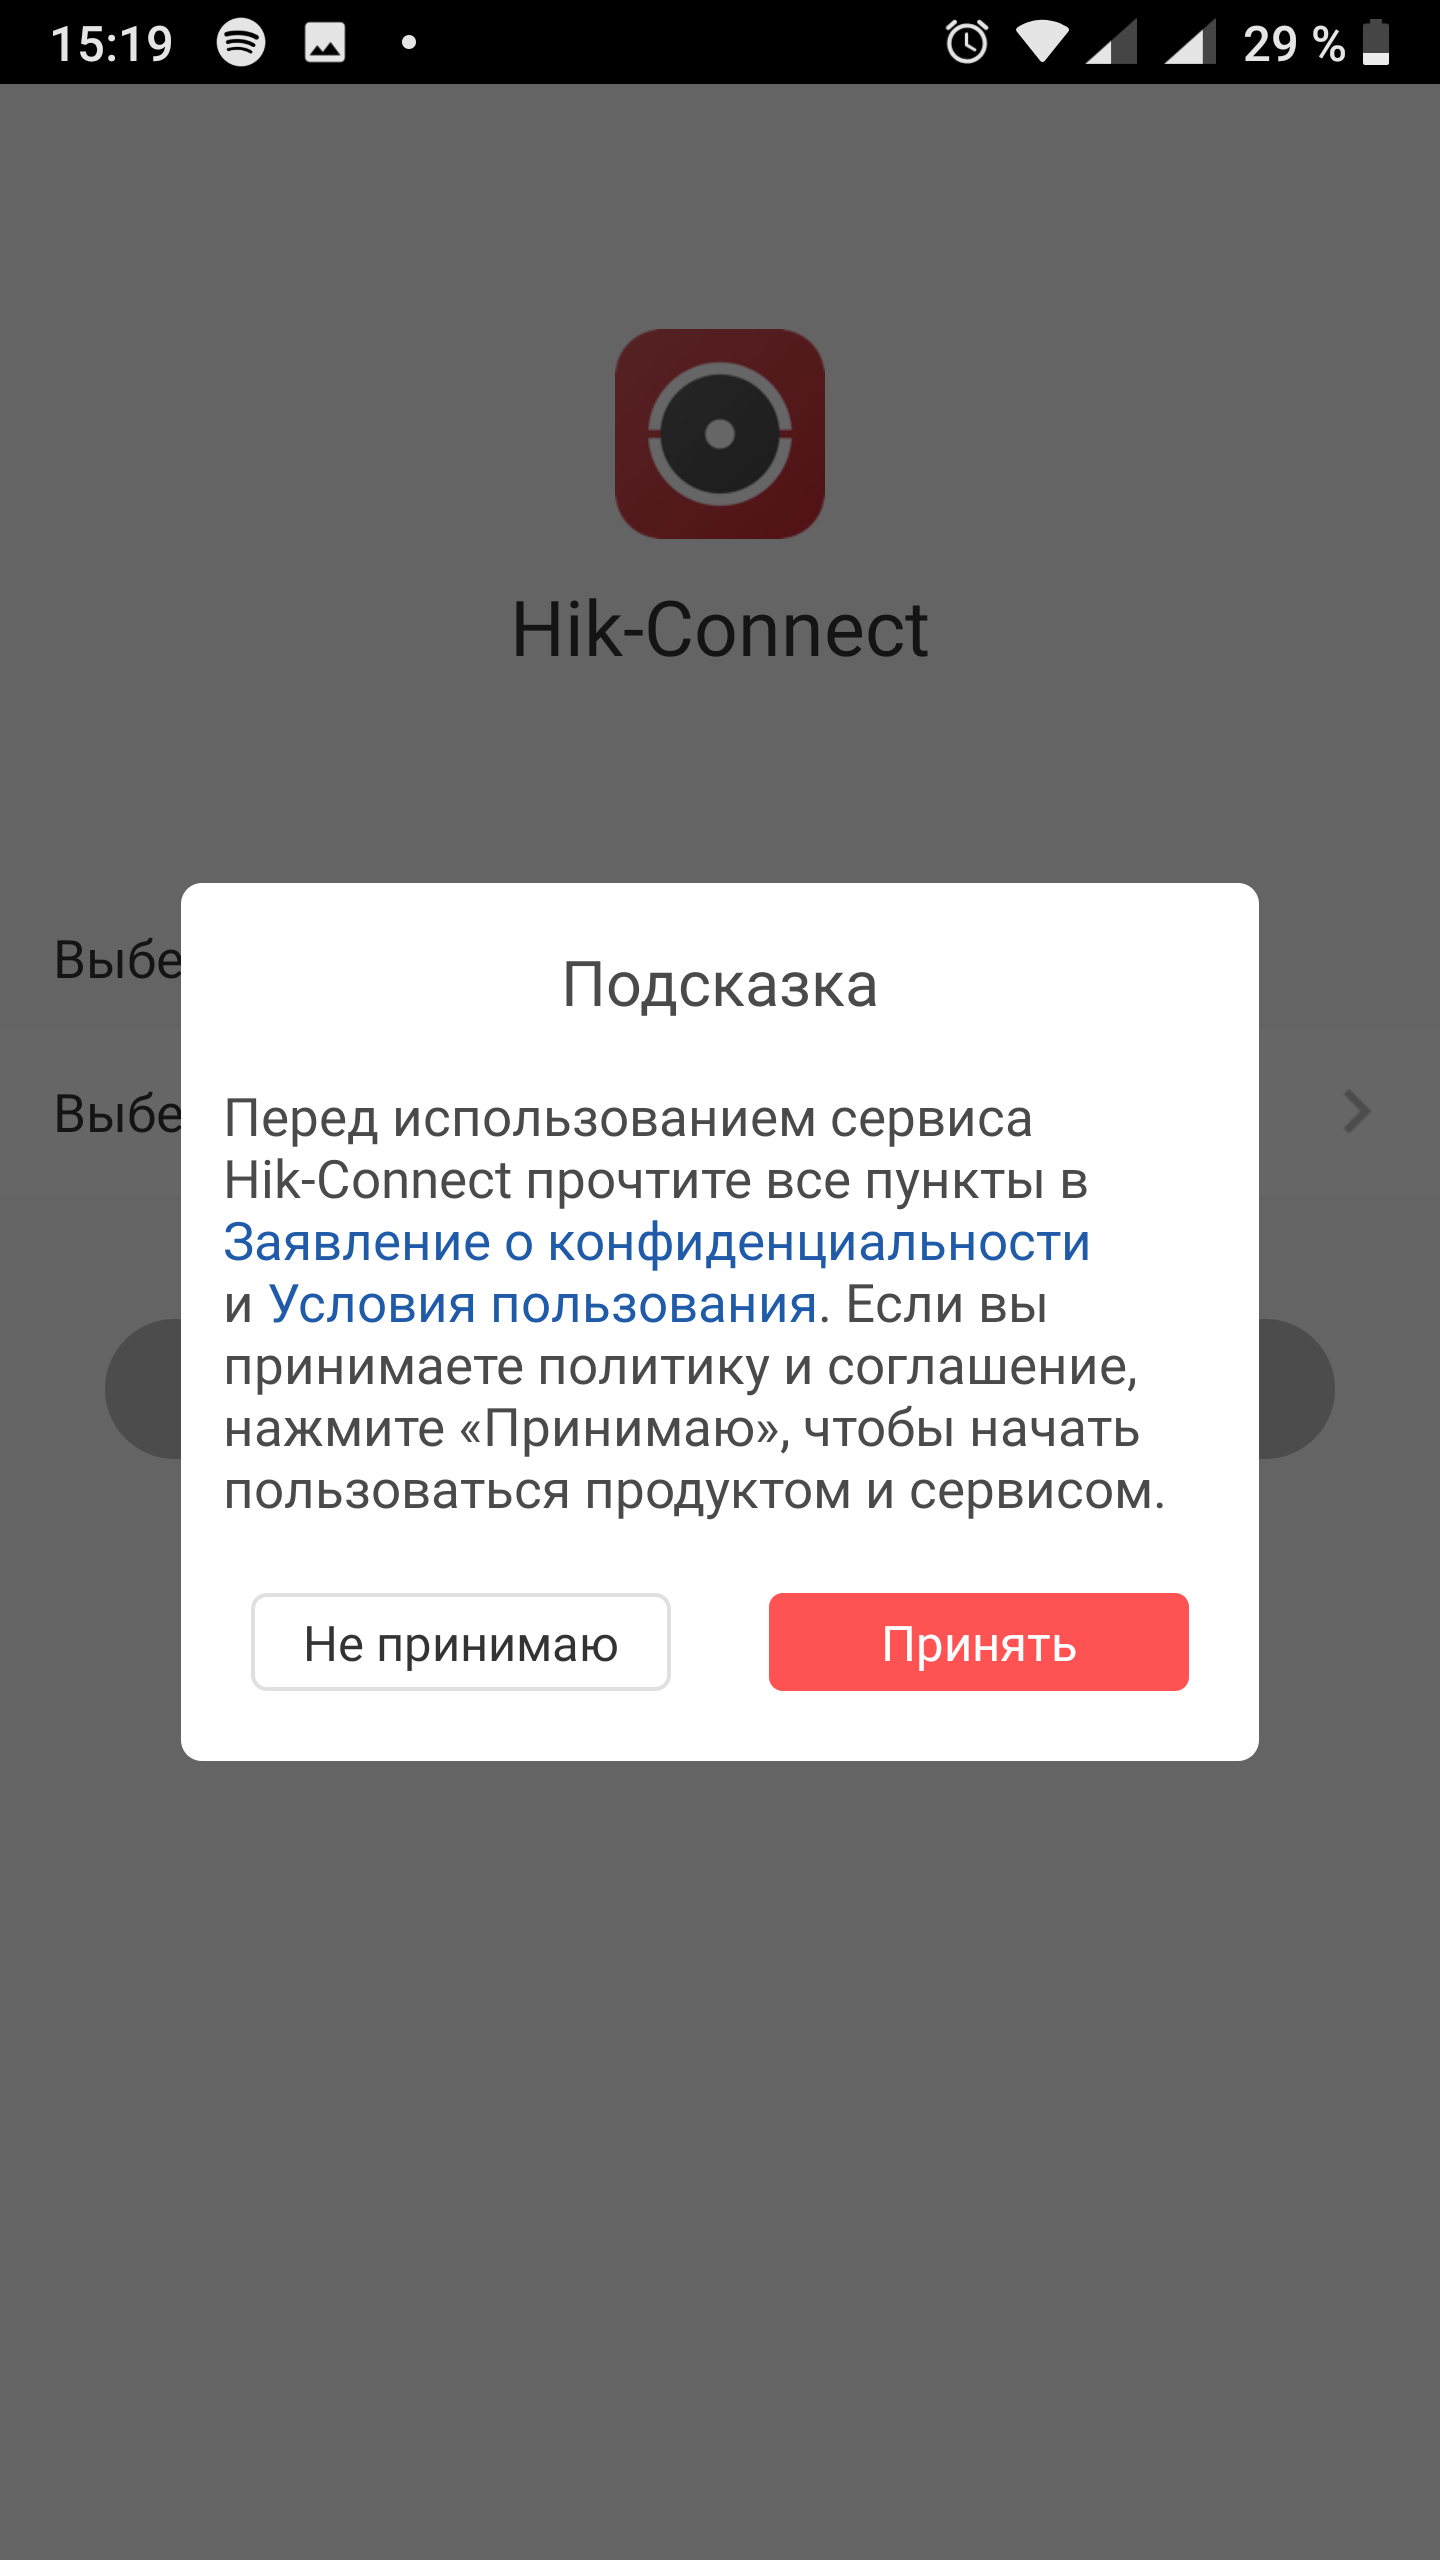 hik-connect-install-2.png